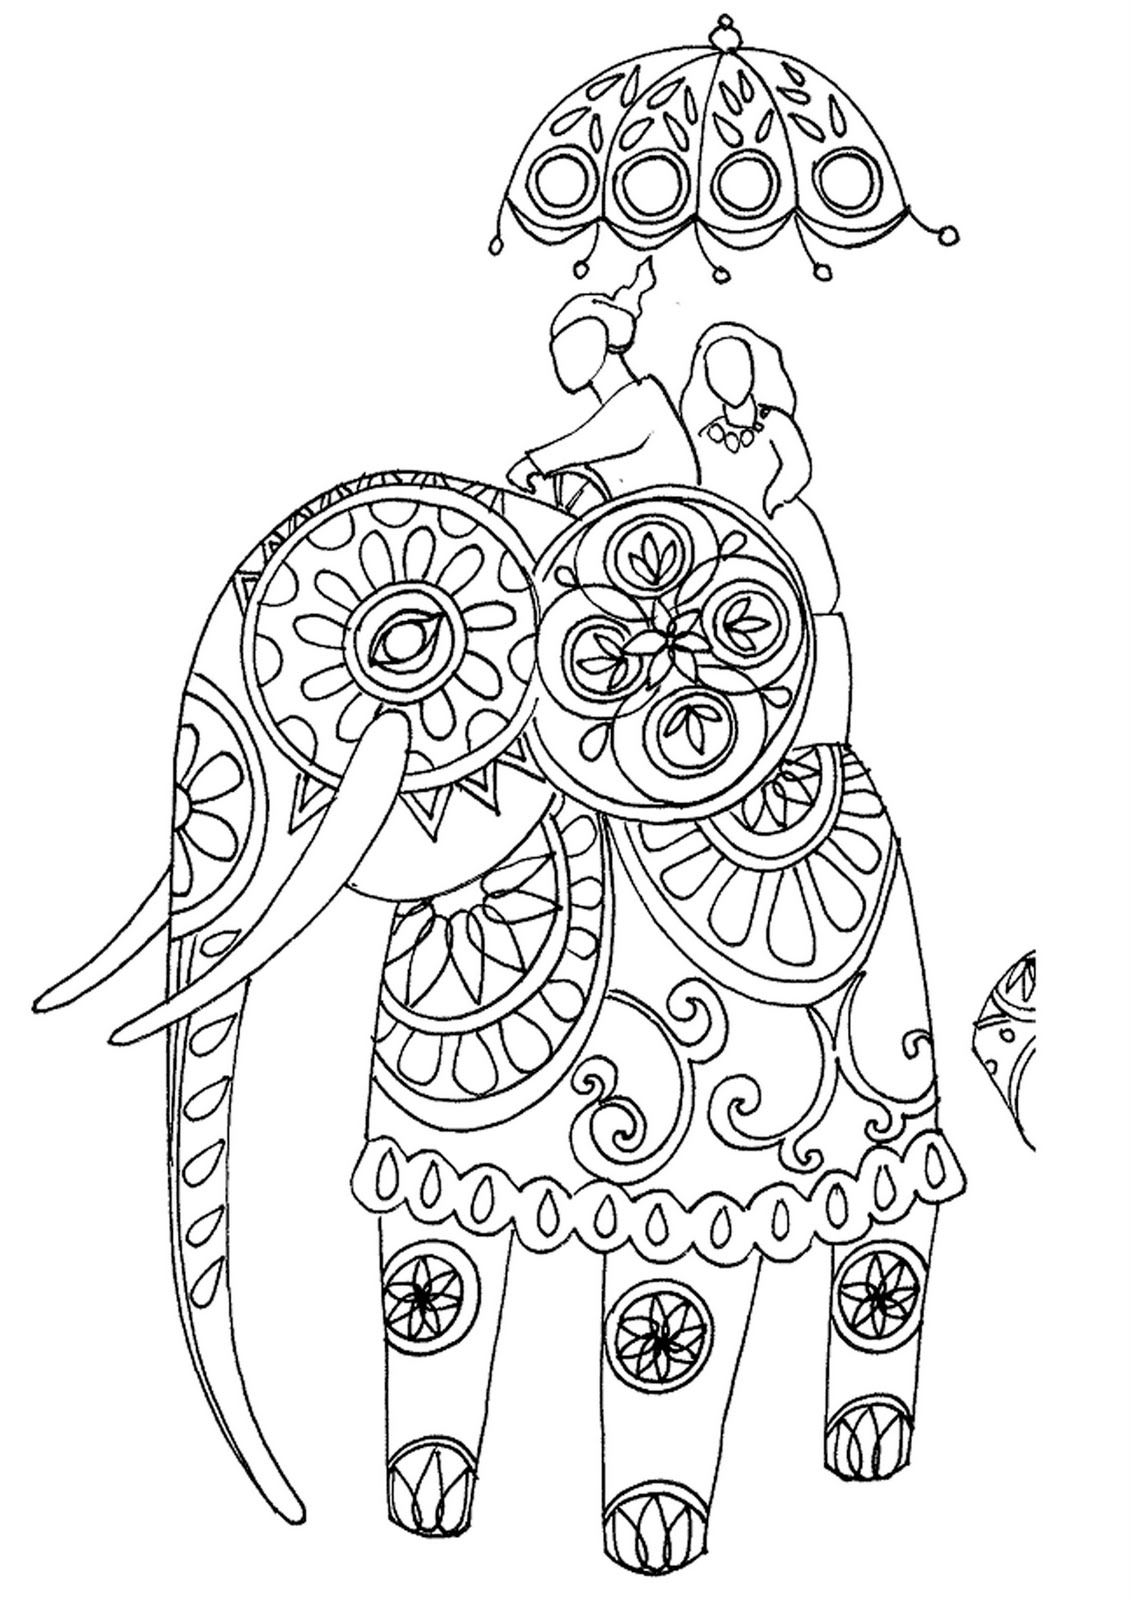 Amazing patterned elephant with riders on back tattoo design